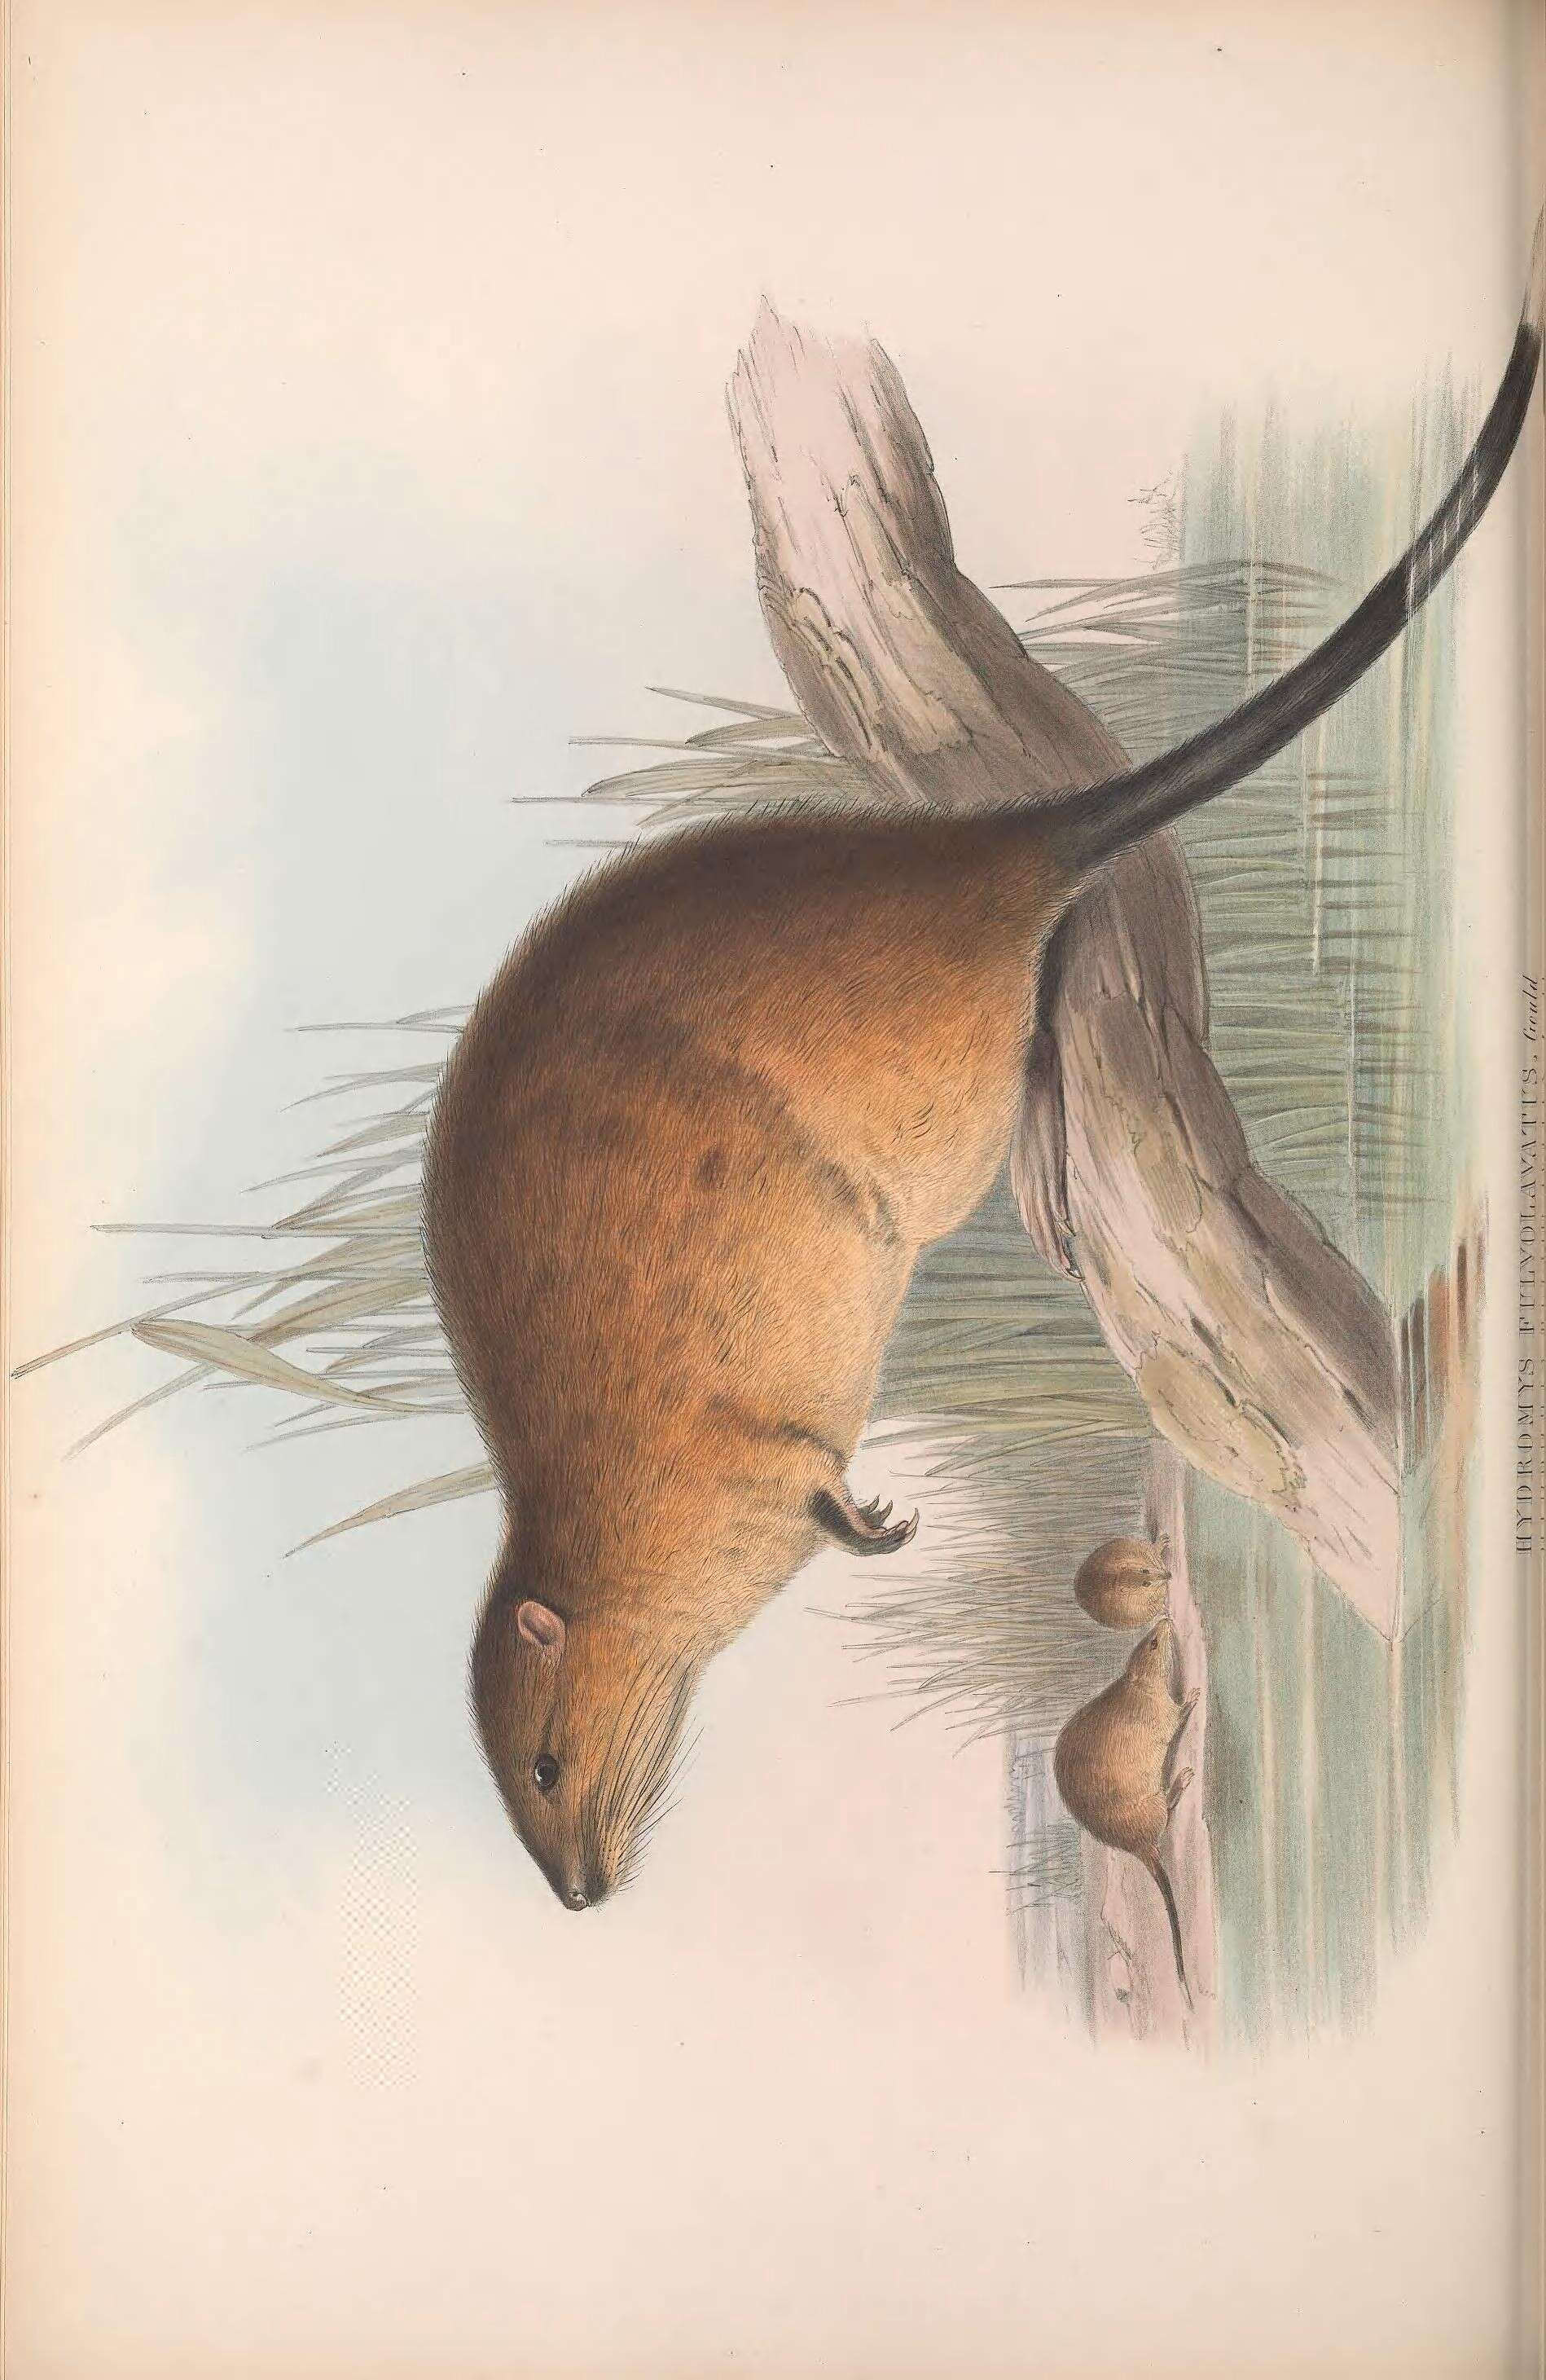 Image of synapsids